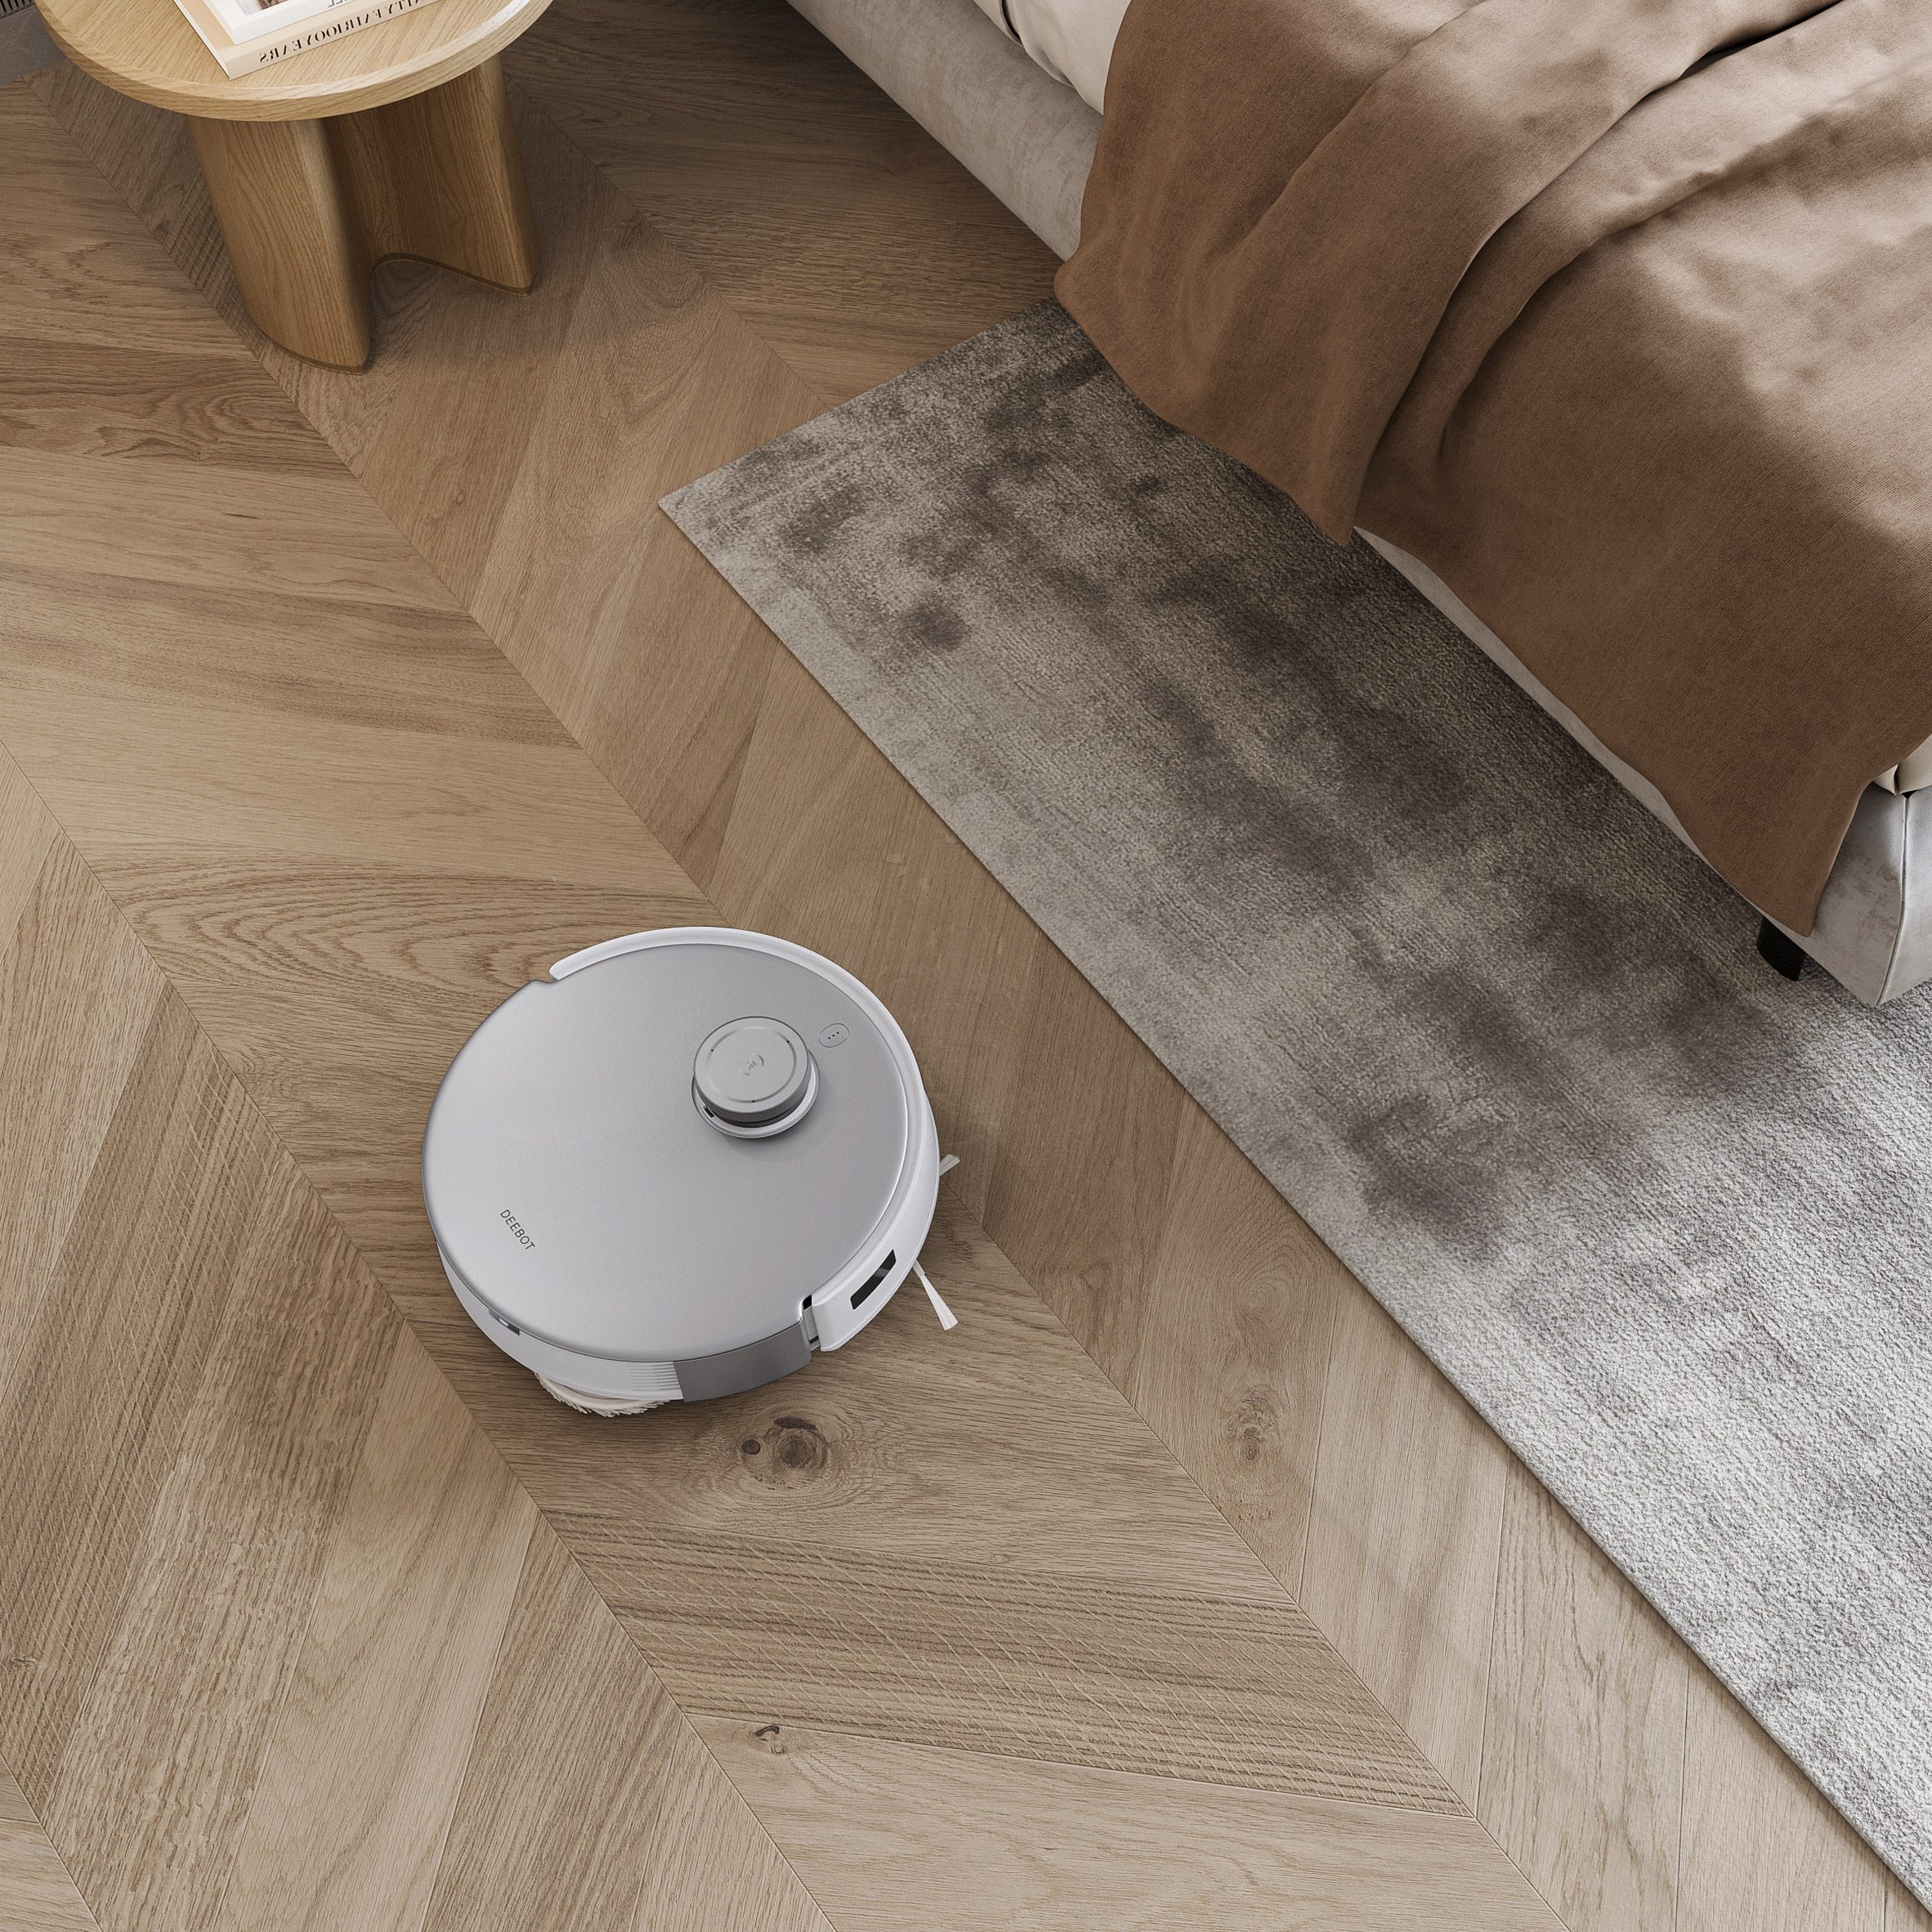 Ecovac's self-cleaning mop and vacuum robot